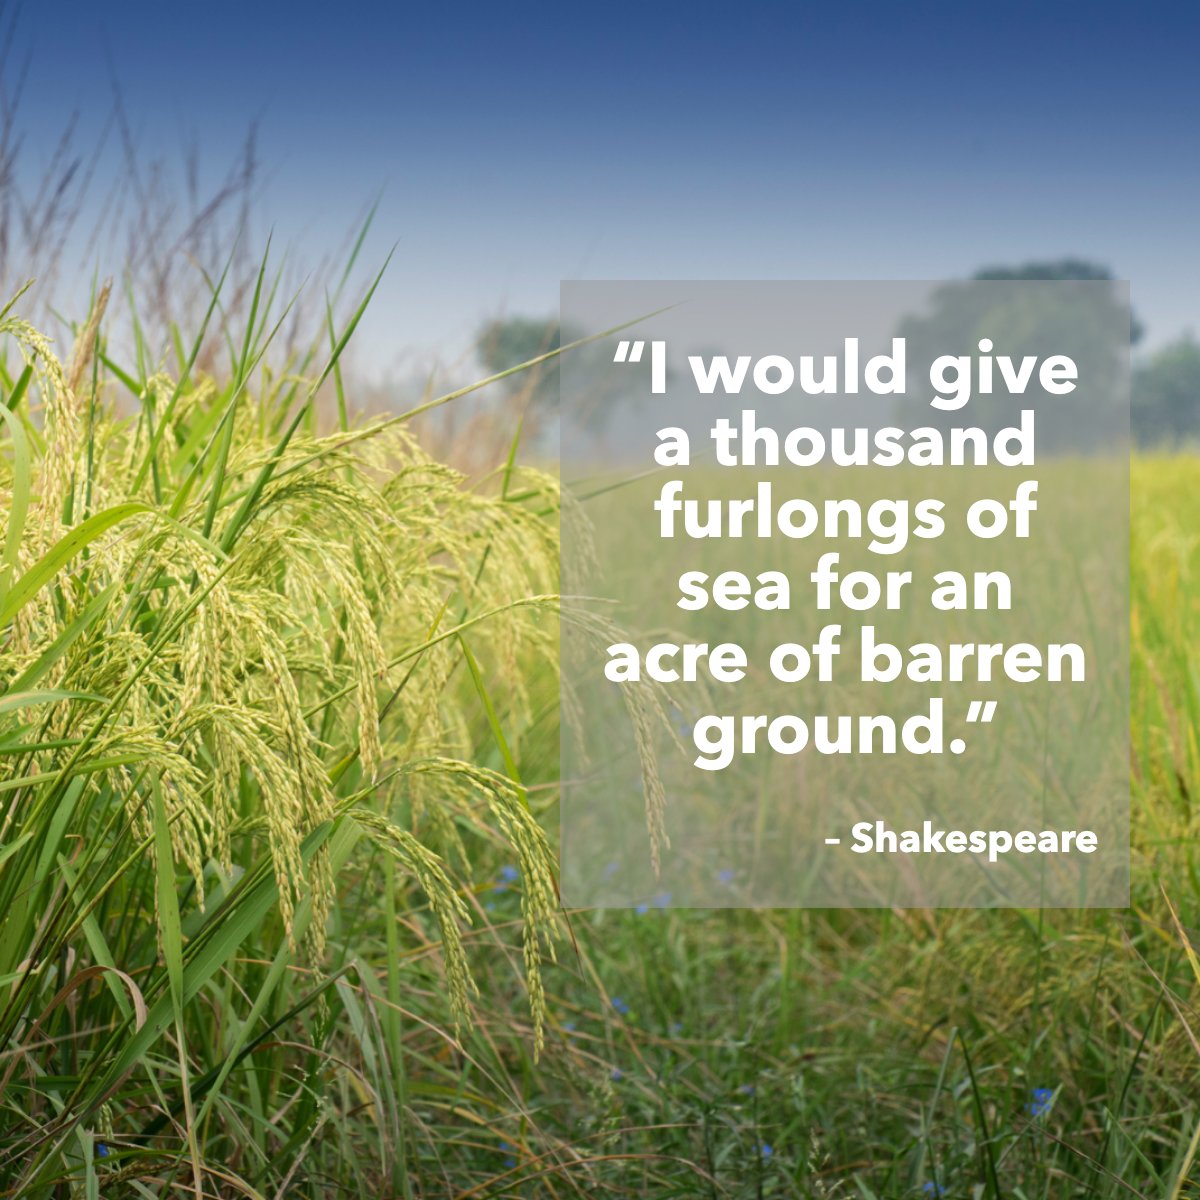 'I would give a thousand furlongs of sea for an acre of barren ground.' 
― William Shakespeare 📖

 #quote #quoteoftheday #land #realestate #property #propertyinvestment #invest
 #swfl #oleglisitsyn #oleglis #sarasota #Florida #wearemvp #sarasotarealtor